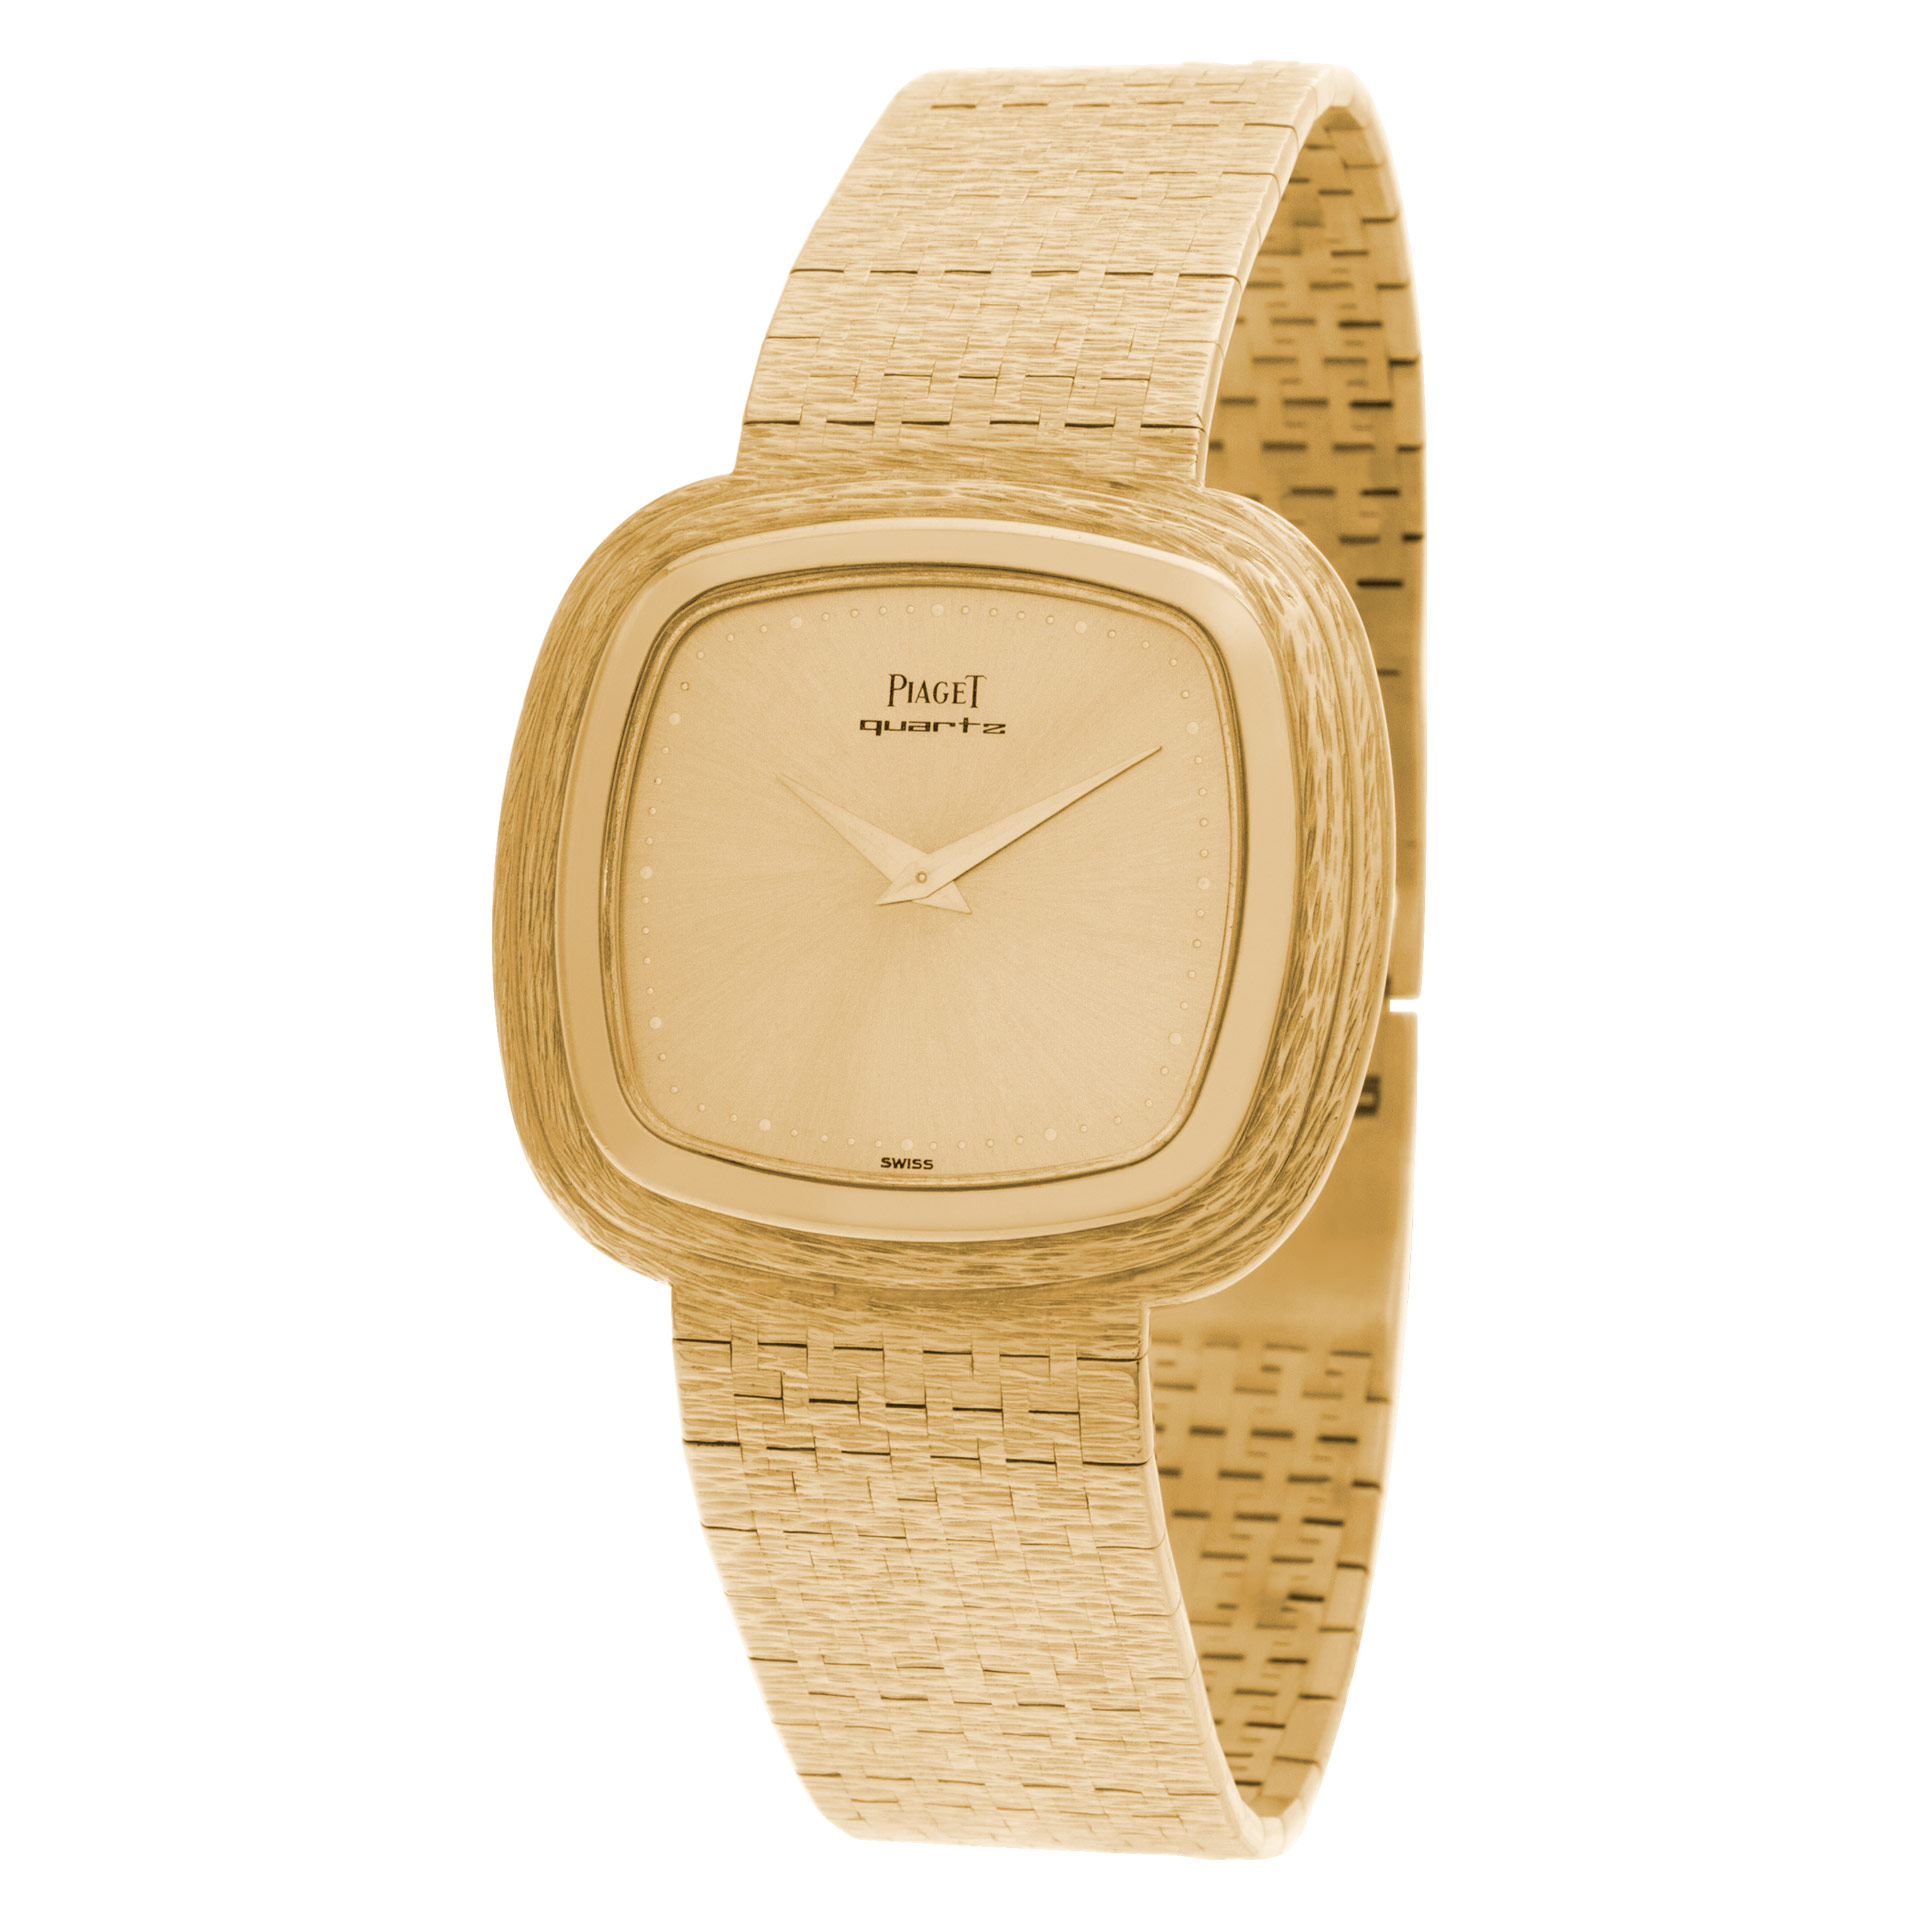 Piaget Classic 34mm 75121a6 image 2